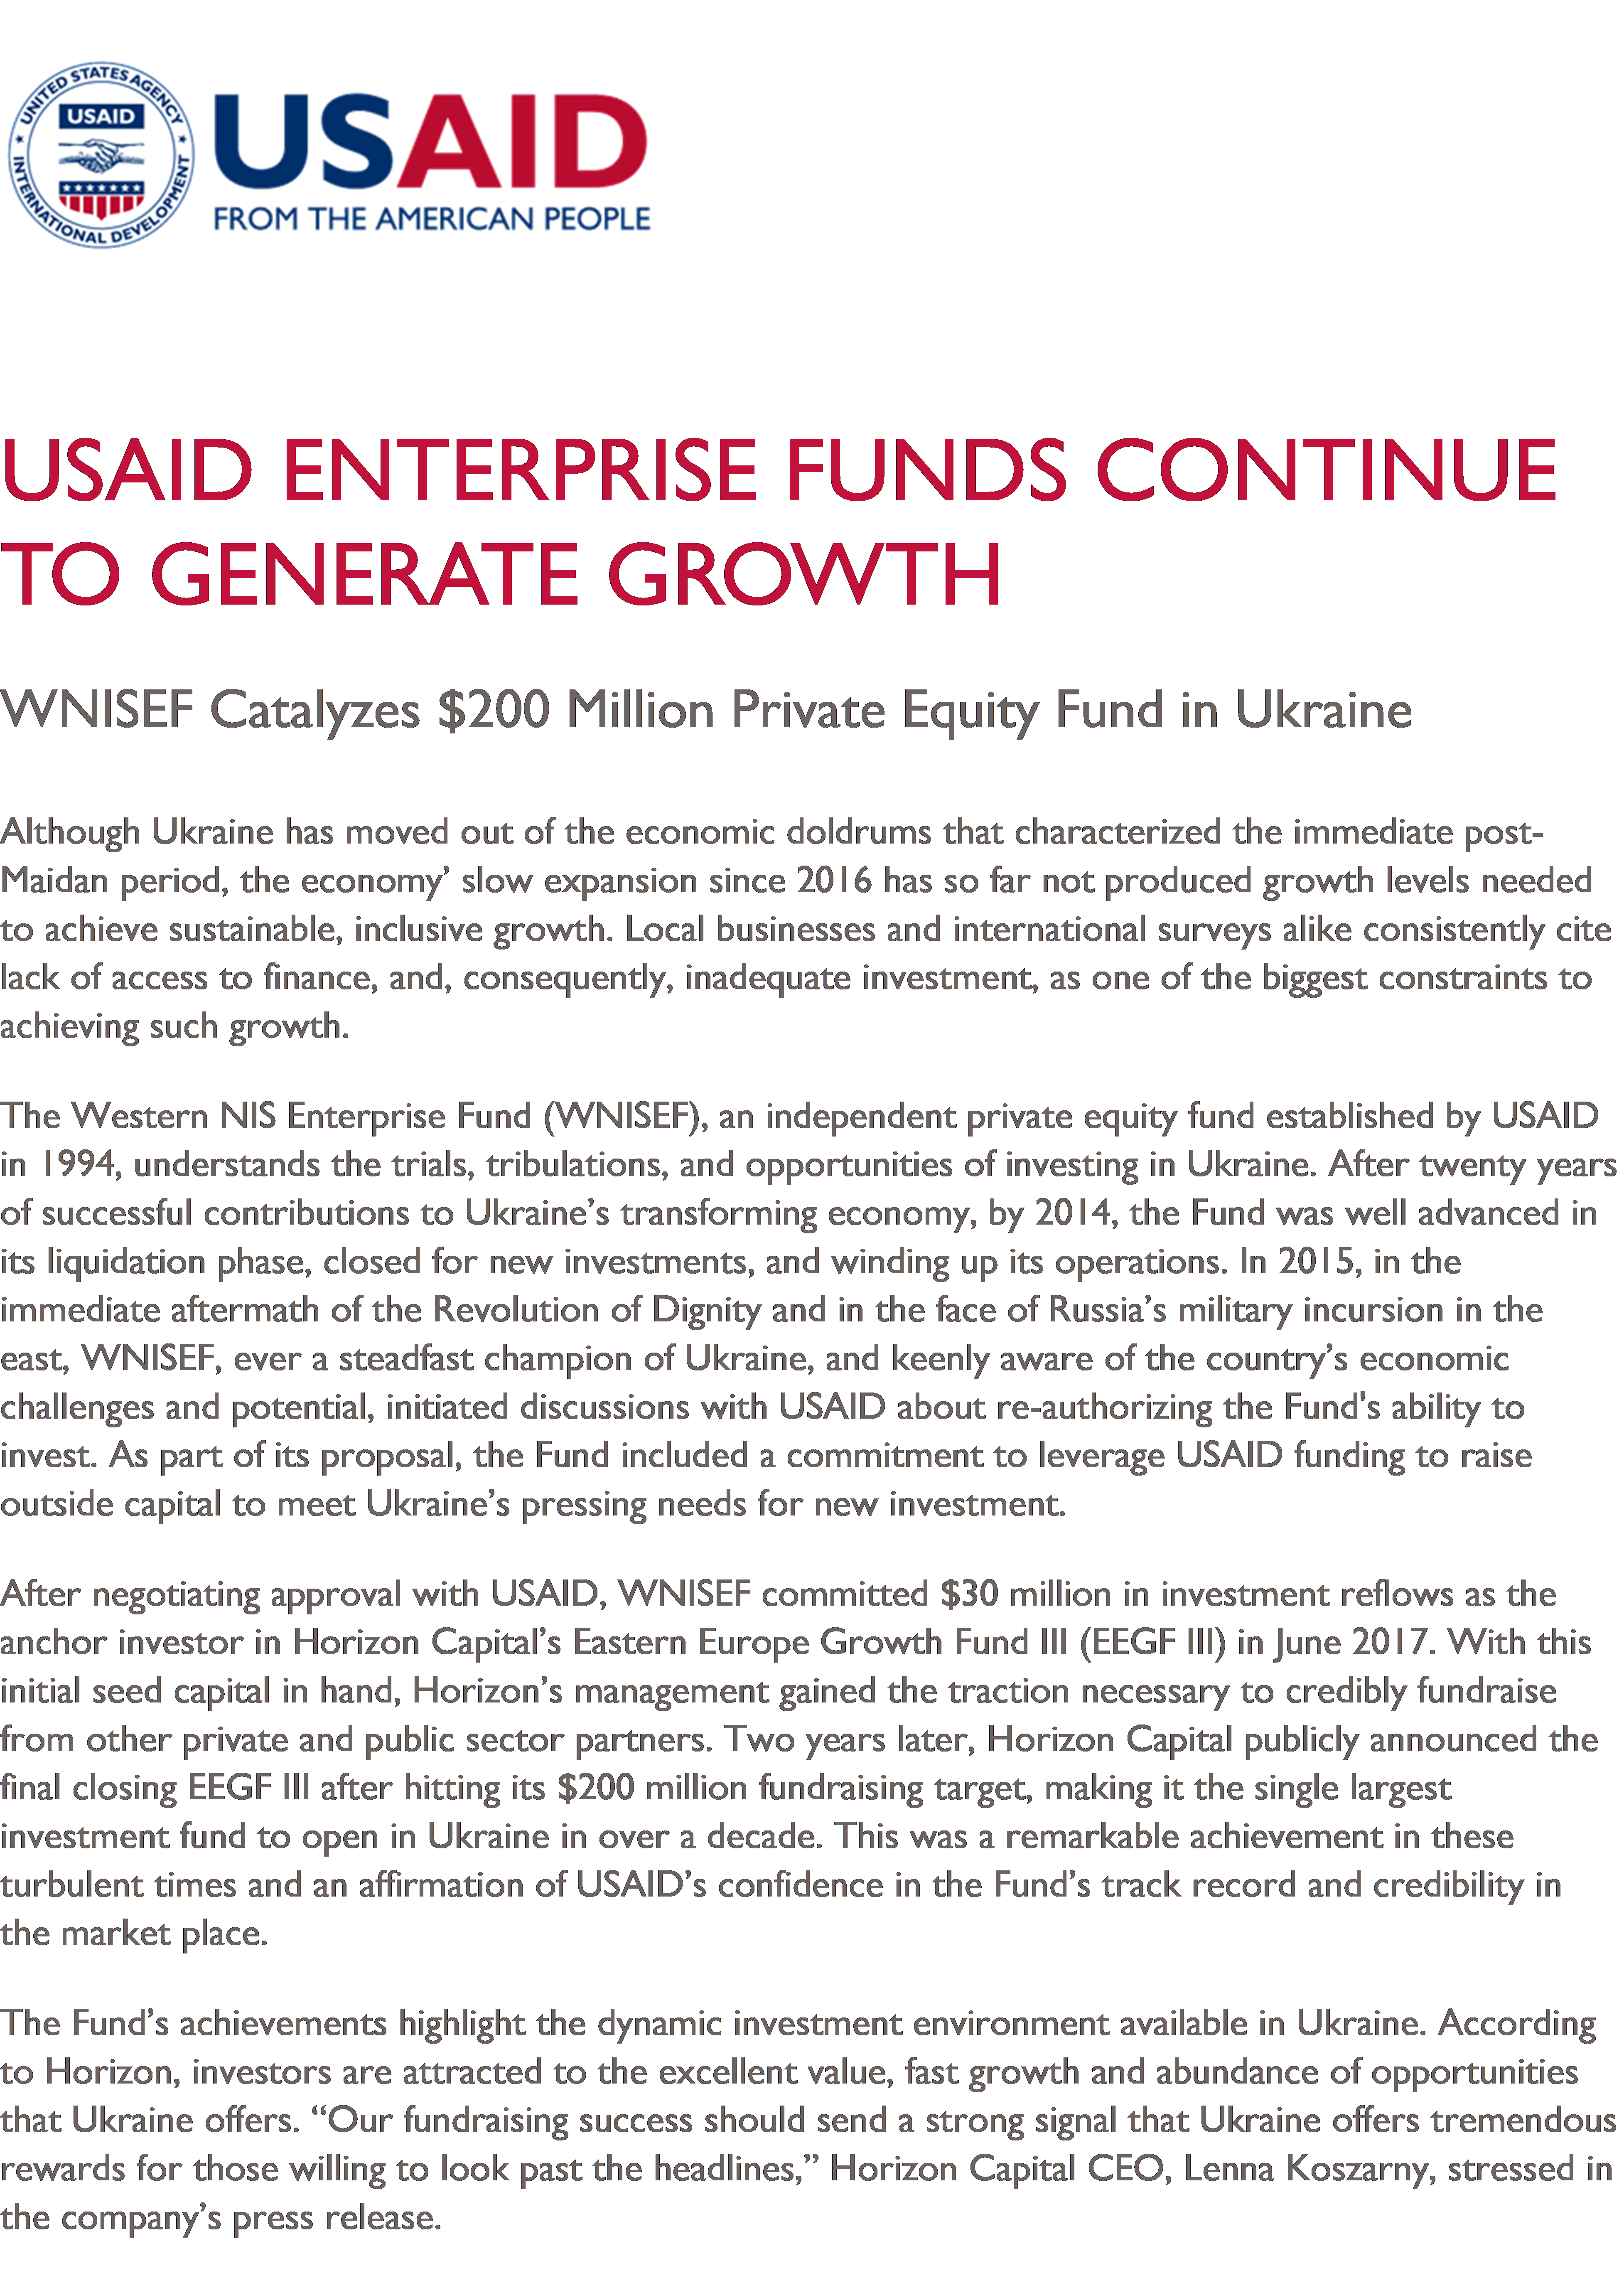 USAID Enterprise Fund Continues To Generate Growth: WNISEF Catalyzes $200 Million Private Equity Fund in Ukraine